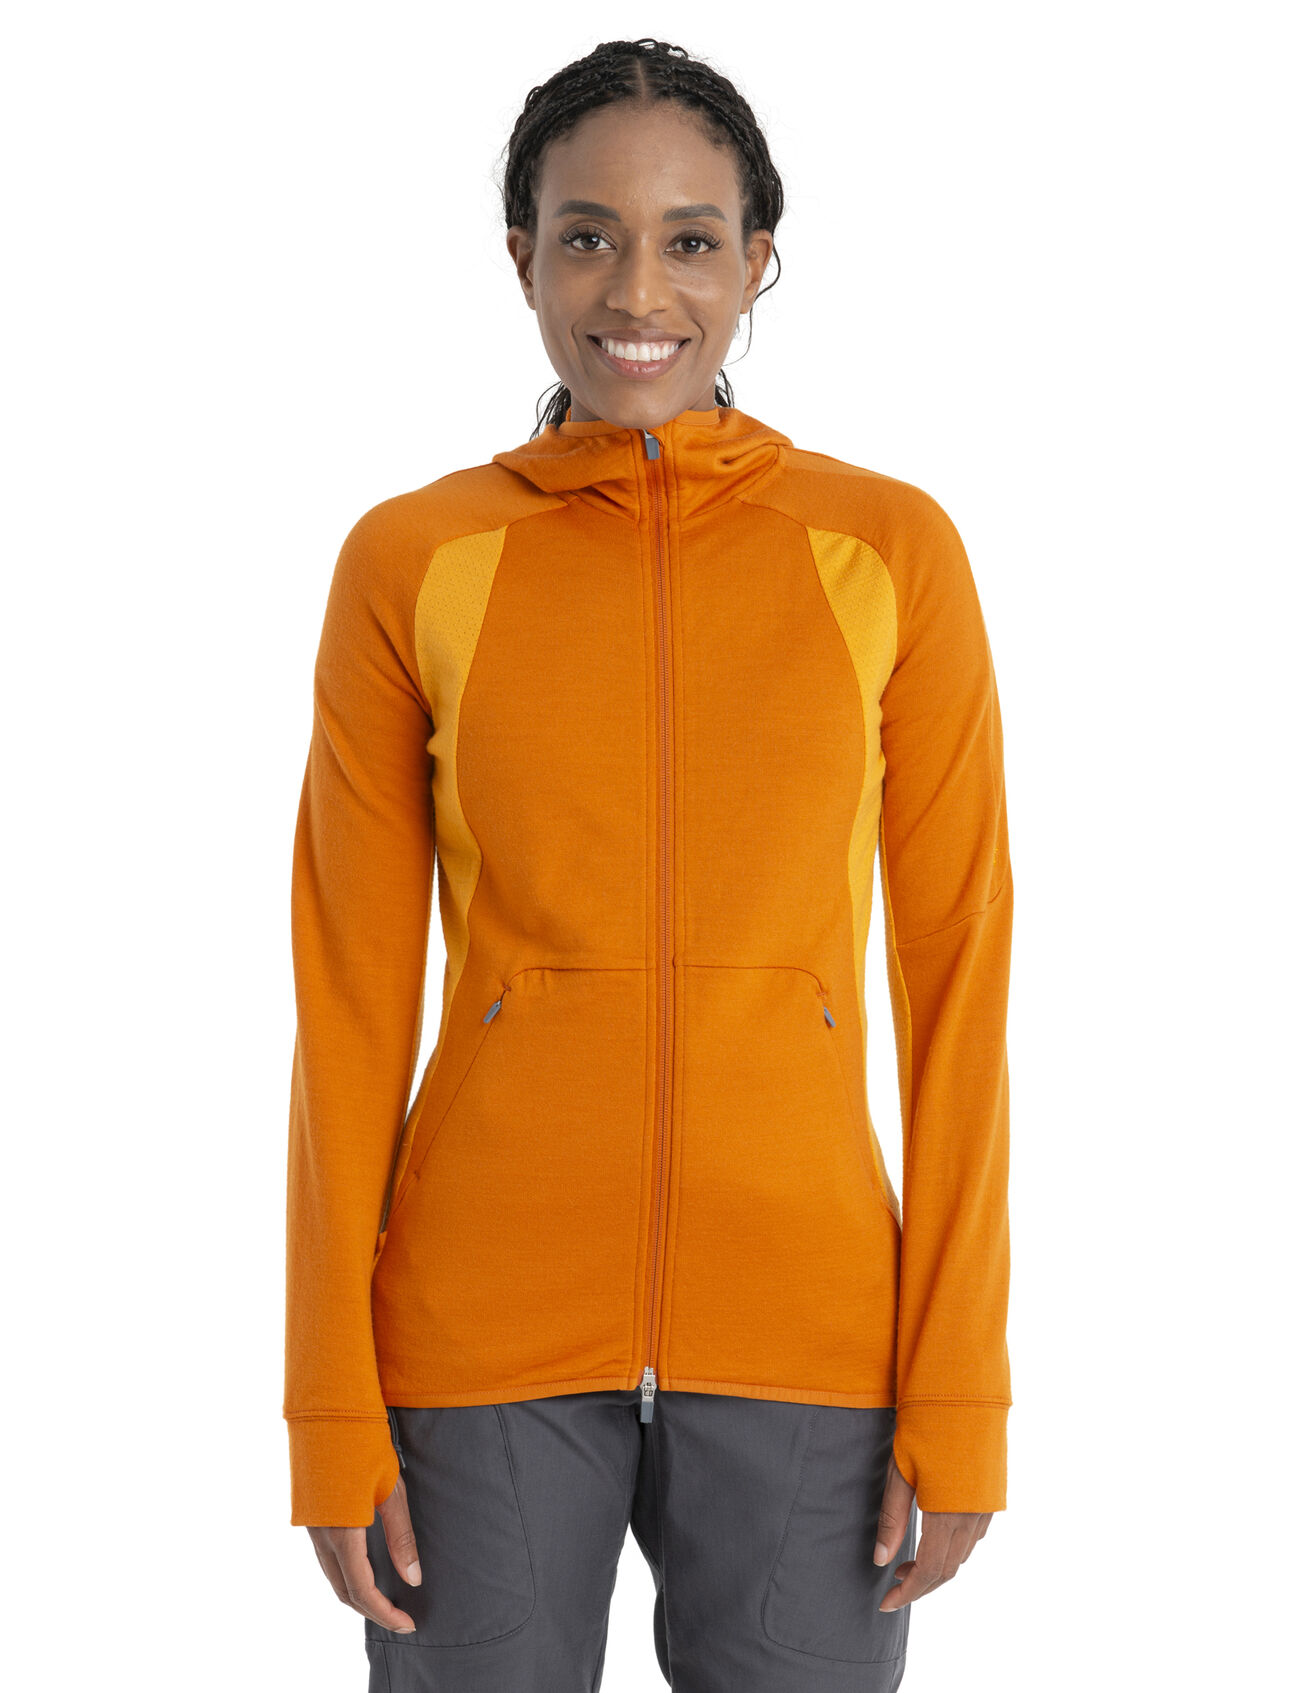 Womens ZoneKnit™ Merino Long Sleeve Zip Hoodie A midweight hoodie designed to balance warmth and breathability while on the move, the ZoneKnit™ Long Sleeve Zip Hood combines our 100% Merino fabric with strategic panels of eyelet mesh for enhanced airflow.